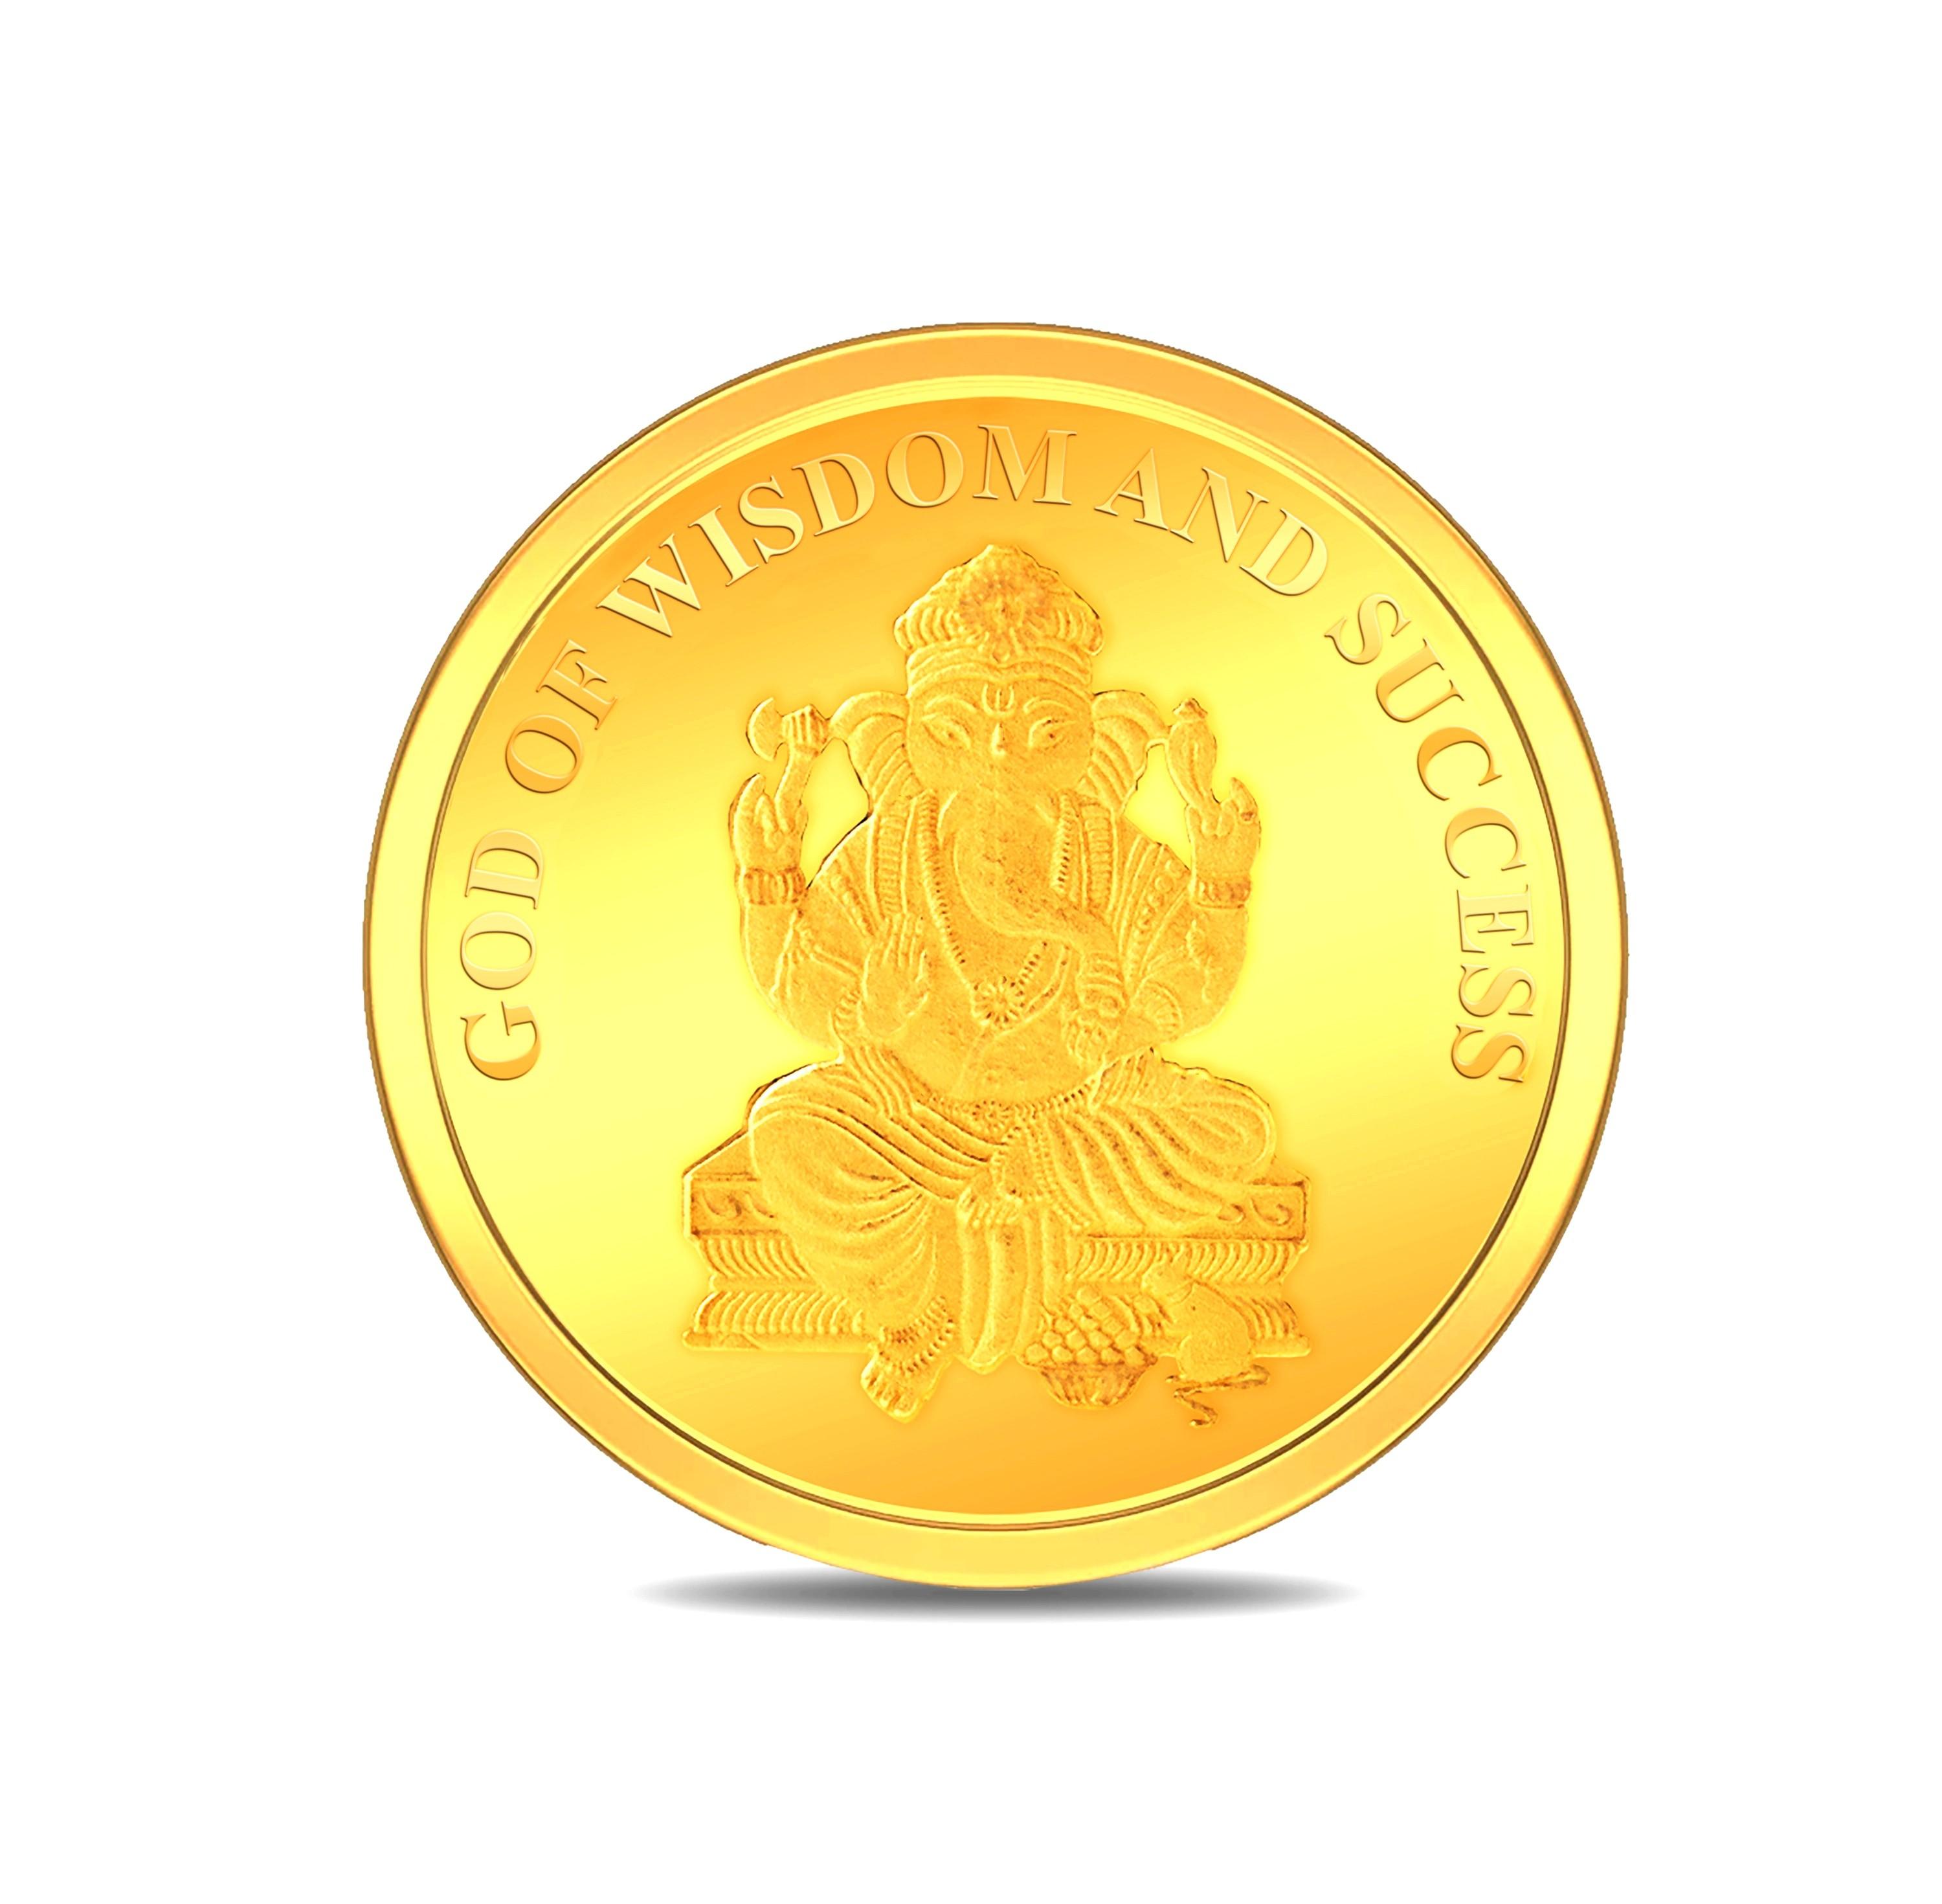 Free Pile Of Gold Coins Png, Download Free Pile Of Gold Coins Png png